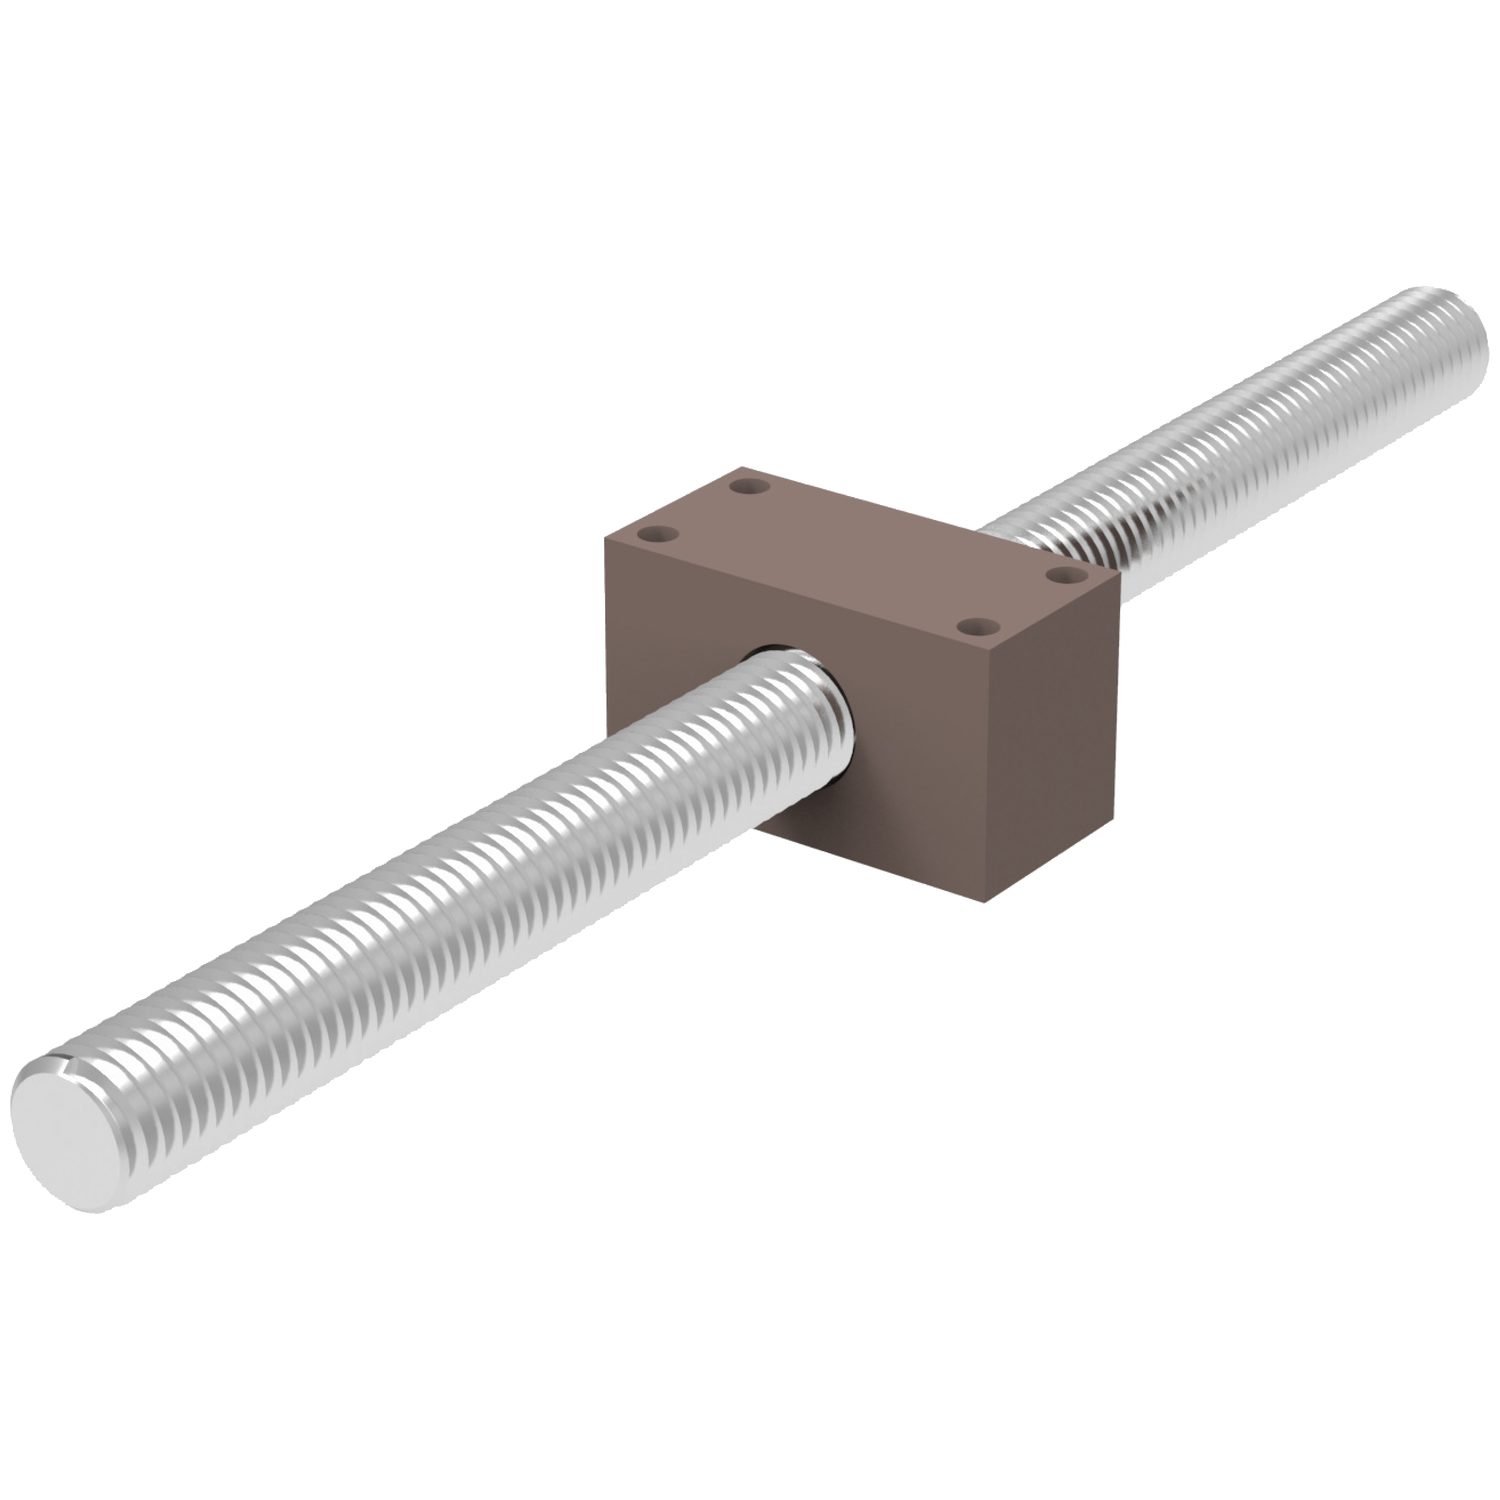 Rectangular Nut Lead Screws Anodized aluminium or 416 stainless steel screw with square acetal resin nut. High precision, tight axial clearance. Nut fitted to screw to ensure anti-backlash.